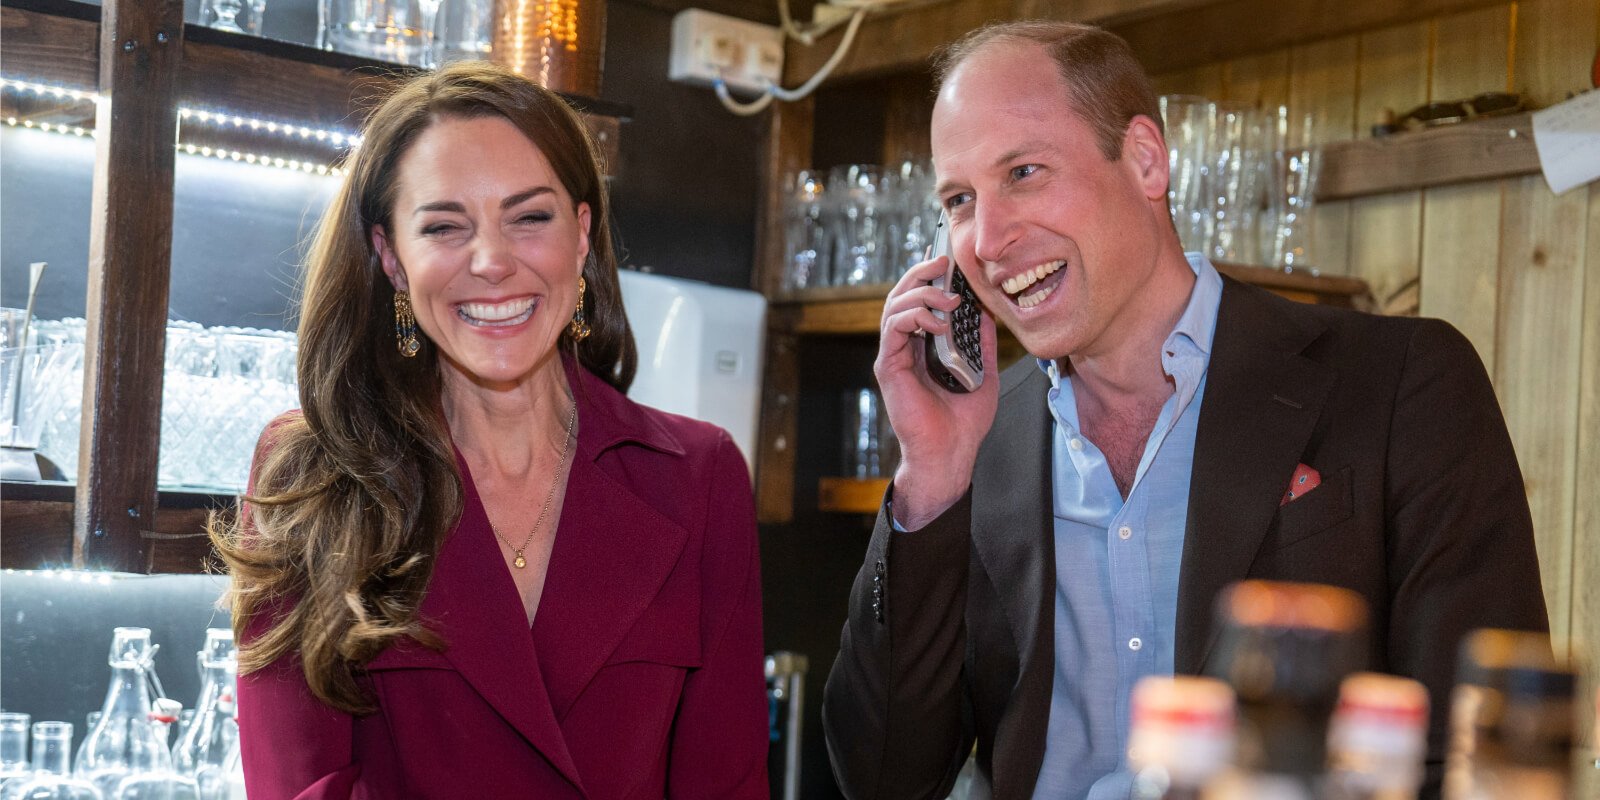 Kate Middleton and Prince William manned the phones at a local Birmingham, England restaurant with hilarious results.